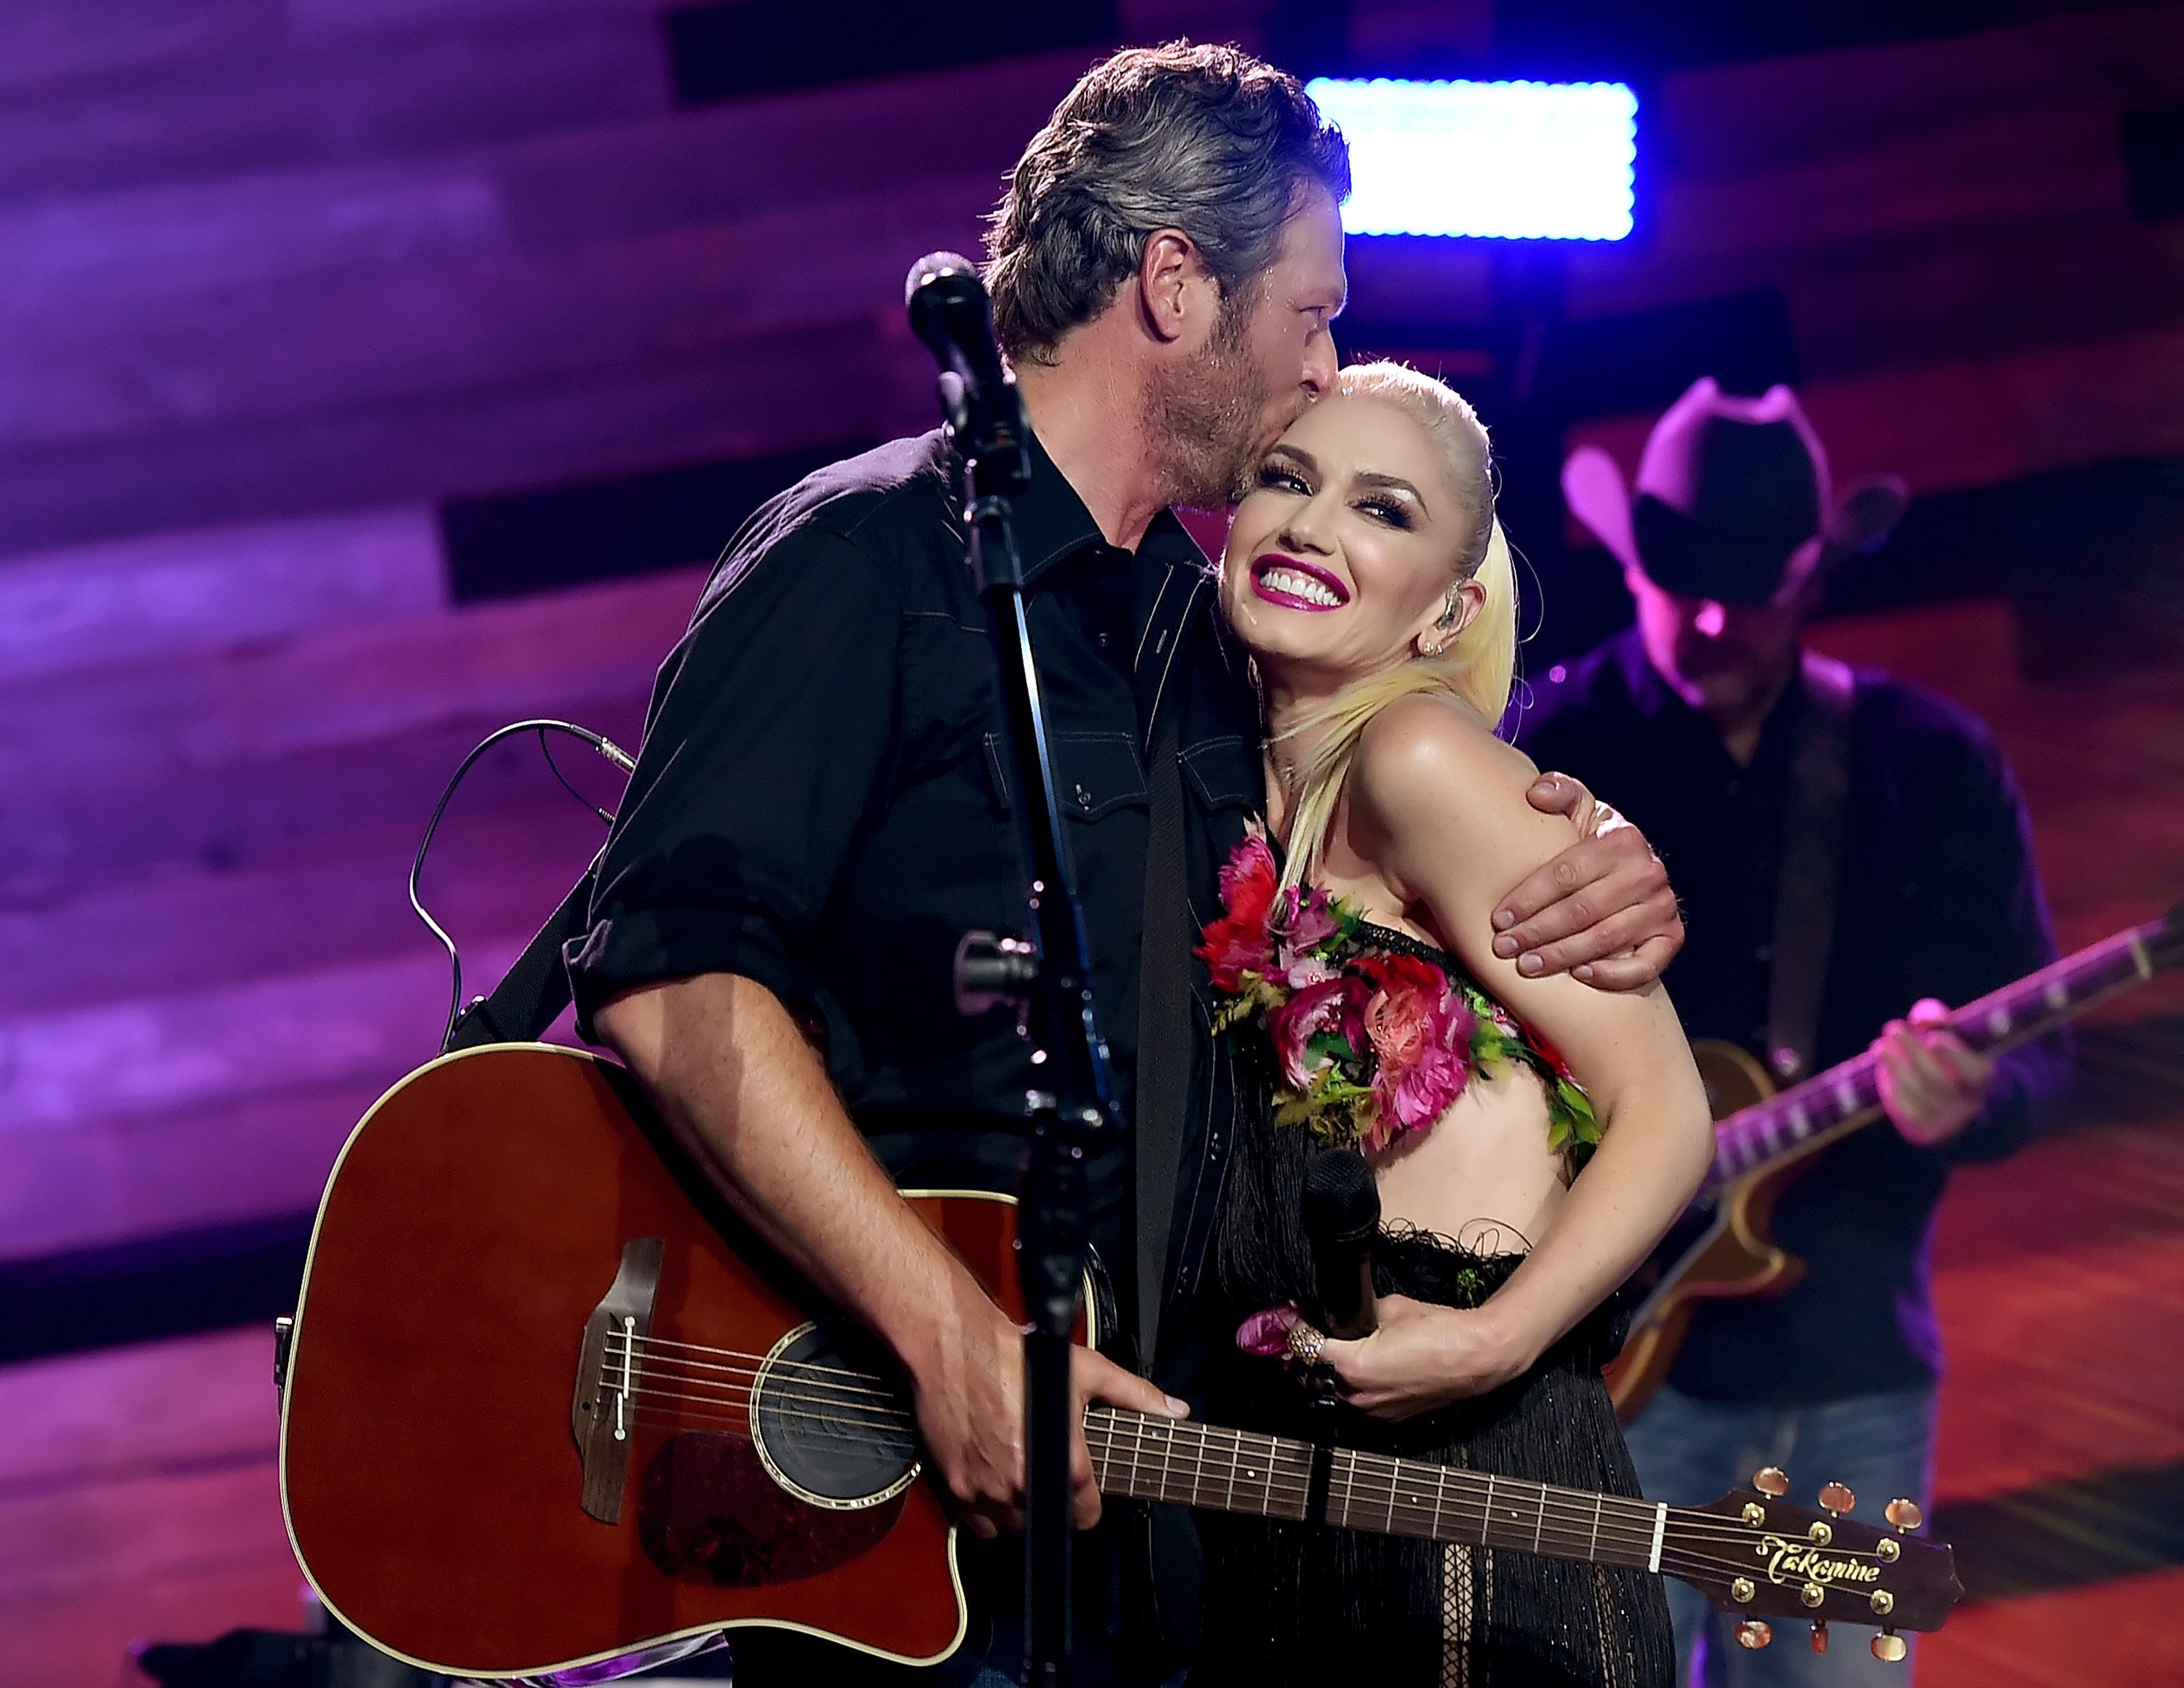 Blake Shelton and Gwen Stefani during their 2016 performance in Burbank. | Photo: Getty Images